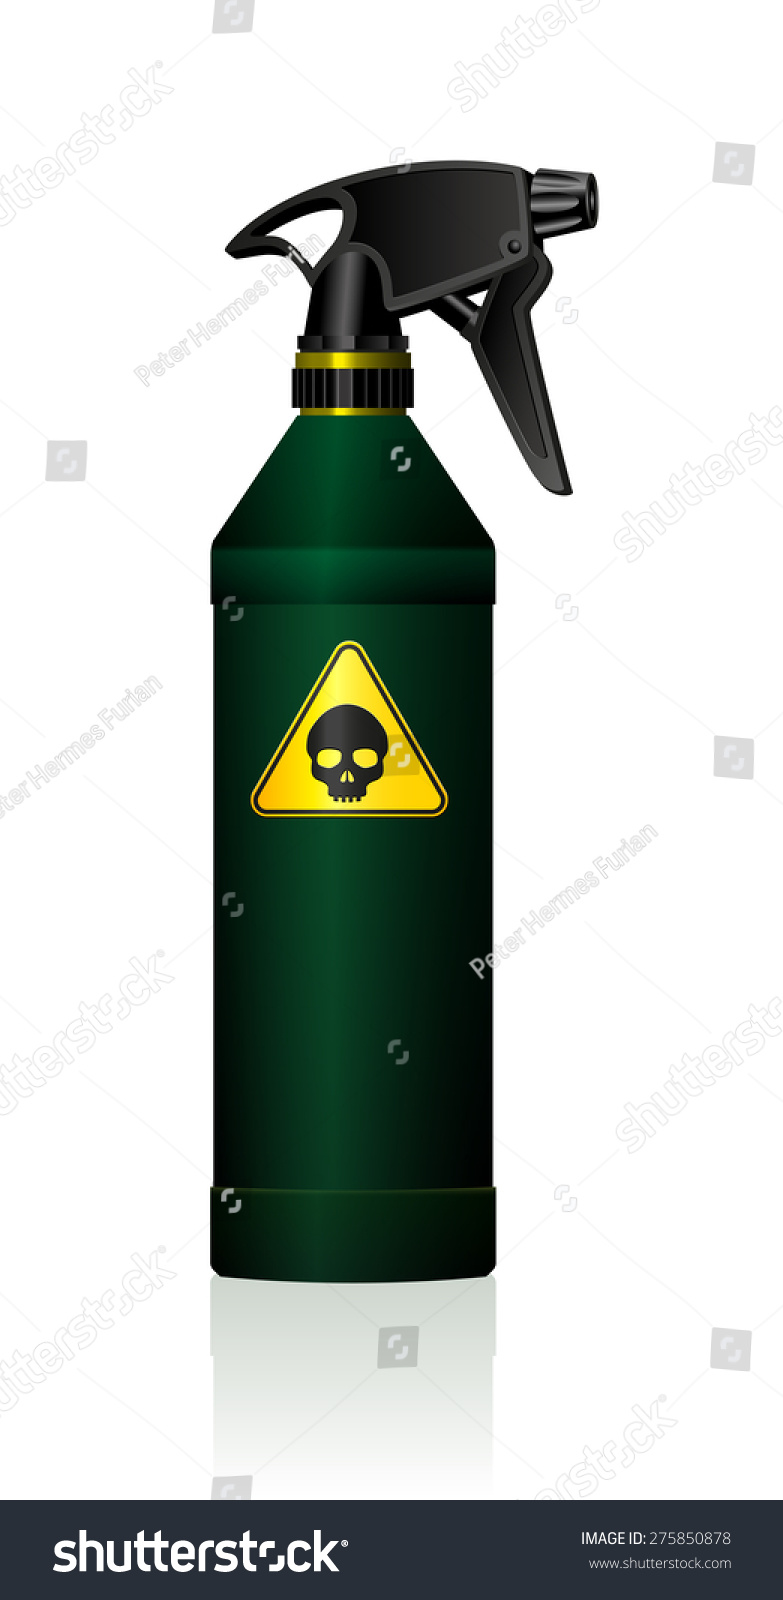 SVG of Poison spray bottle for plant toxins, insecticides, pesticides, biocides and etc - with a black skull on a yellow triangle as a hazard warning sign for toxicity. Isolated vector on white background. svg